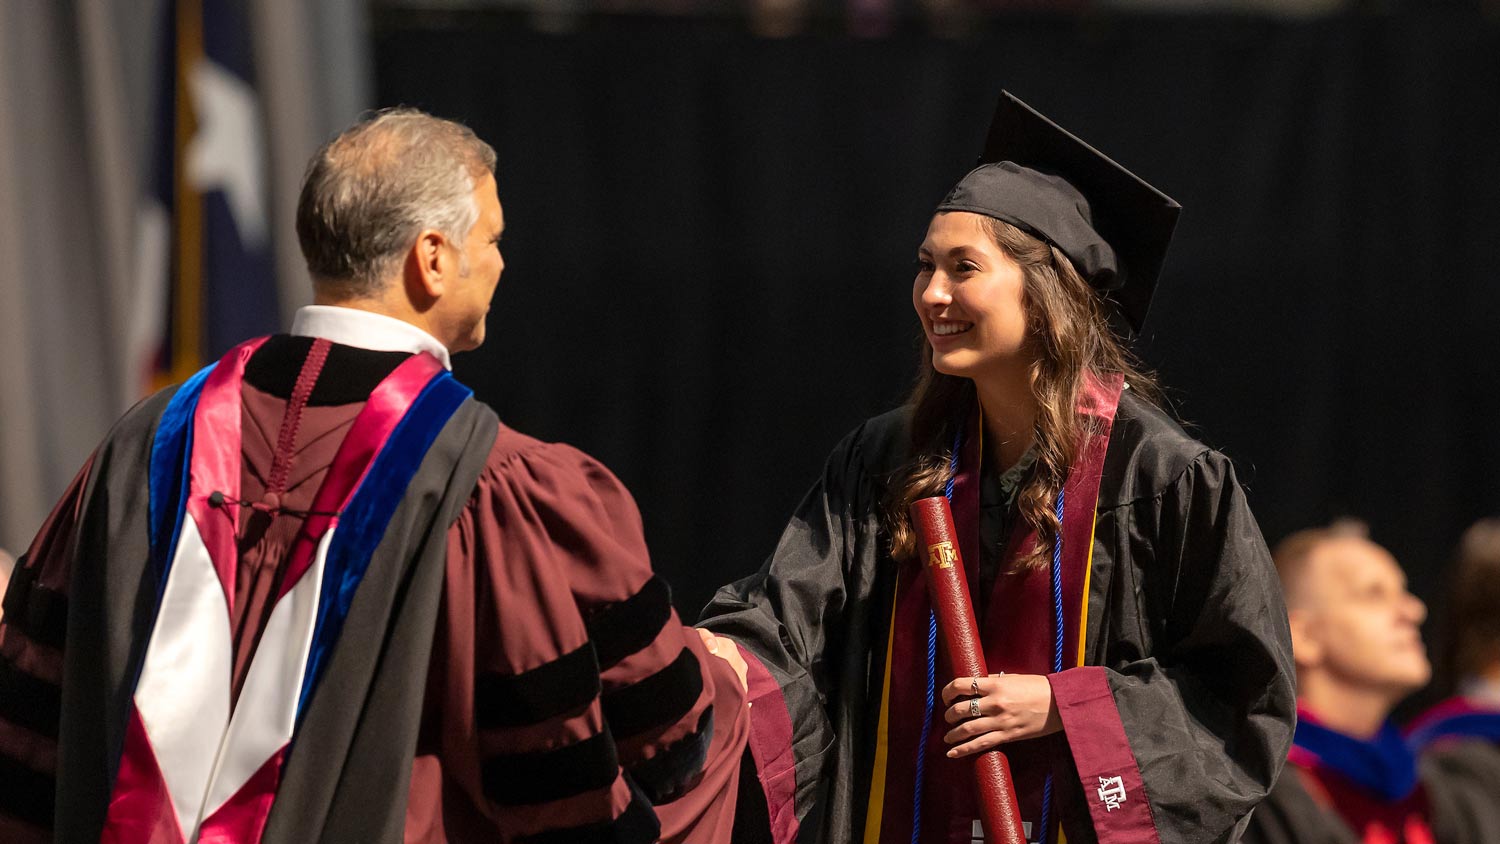 Student shakes a professors hand as she receives her diploma at graduation